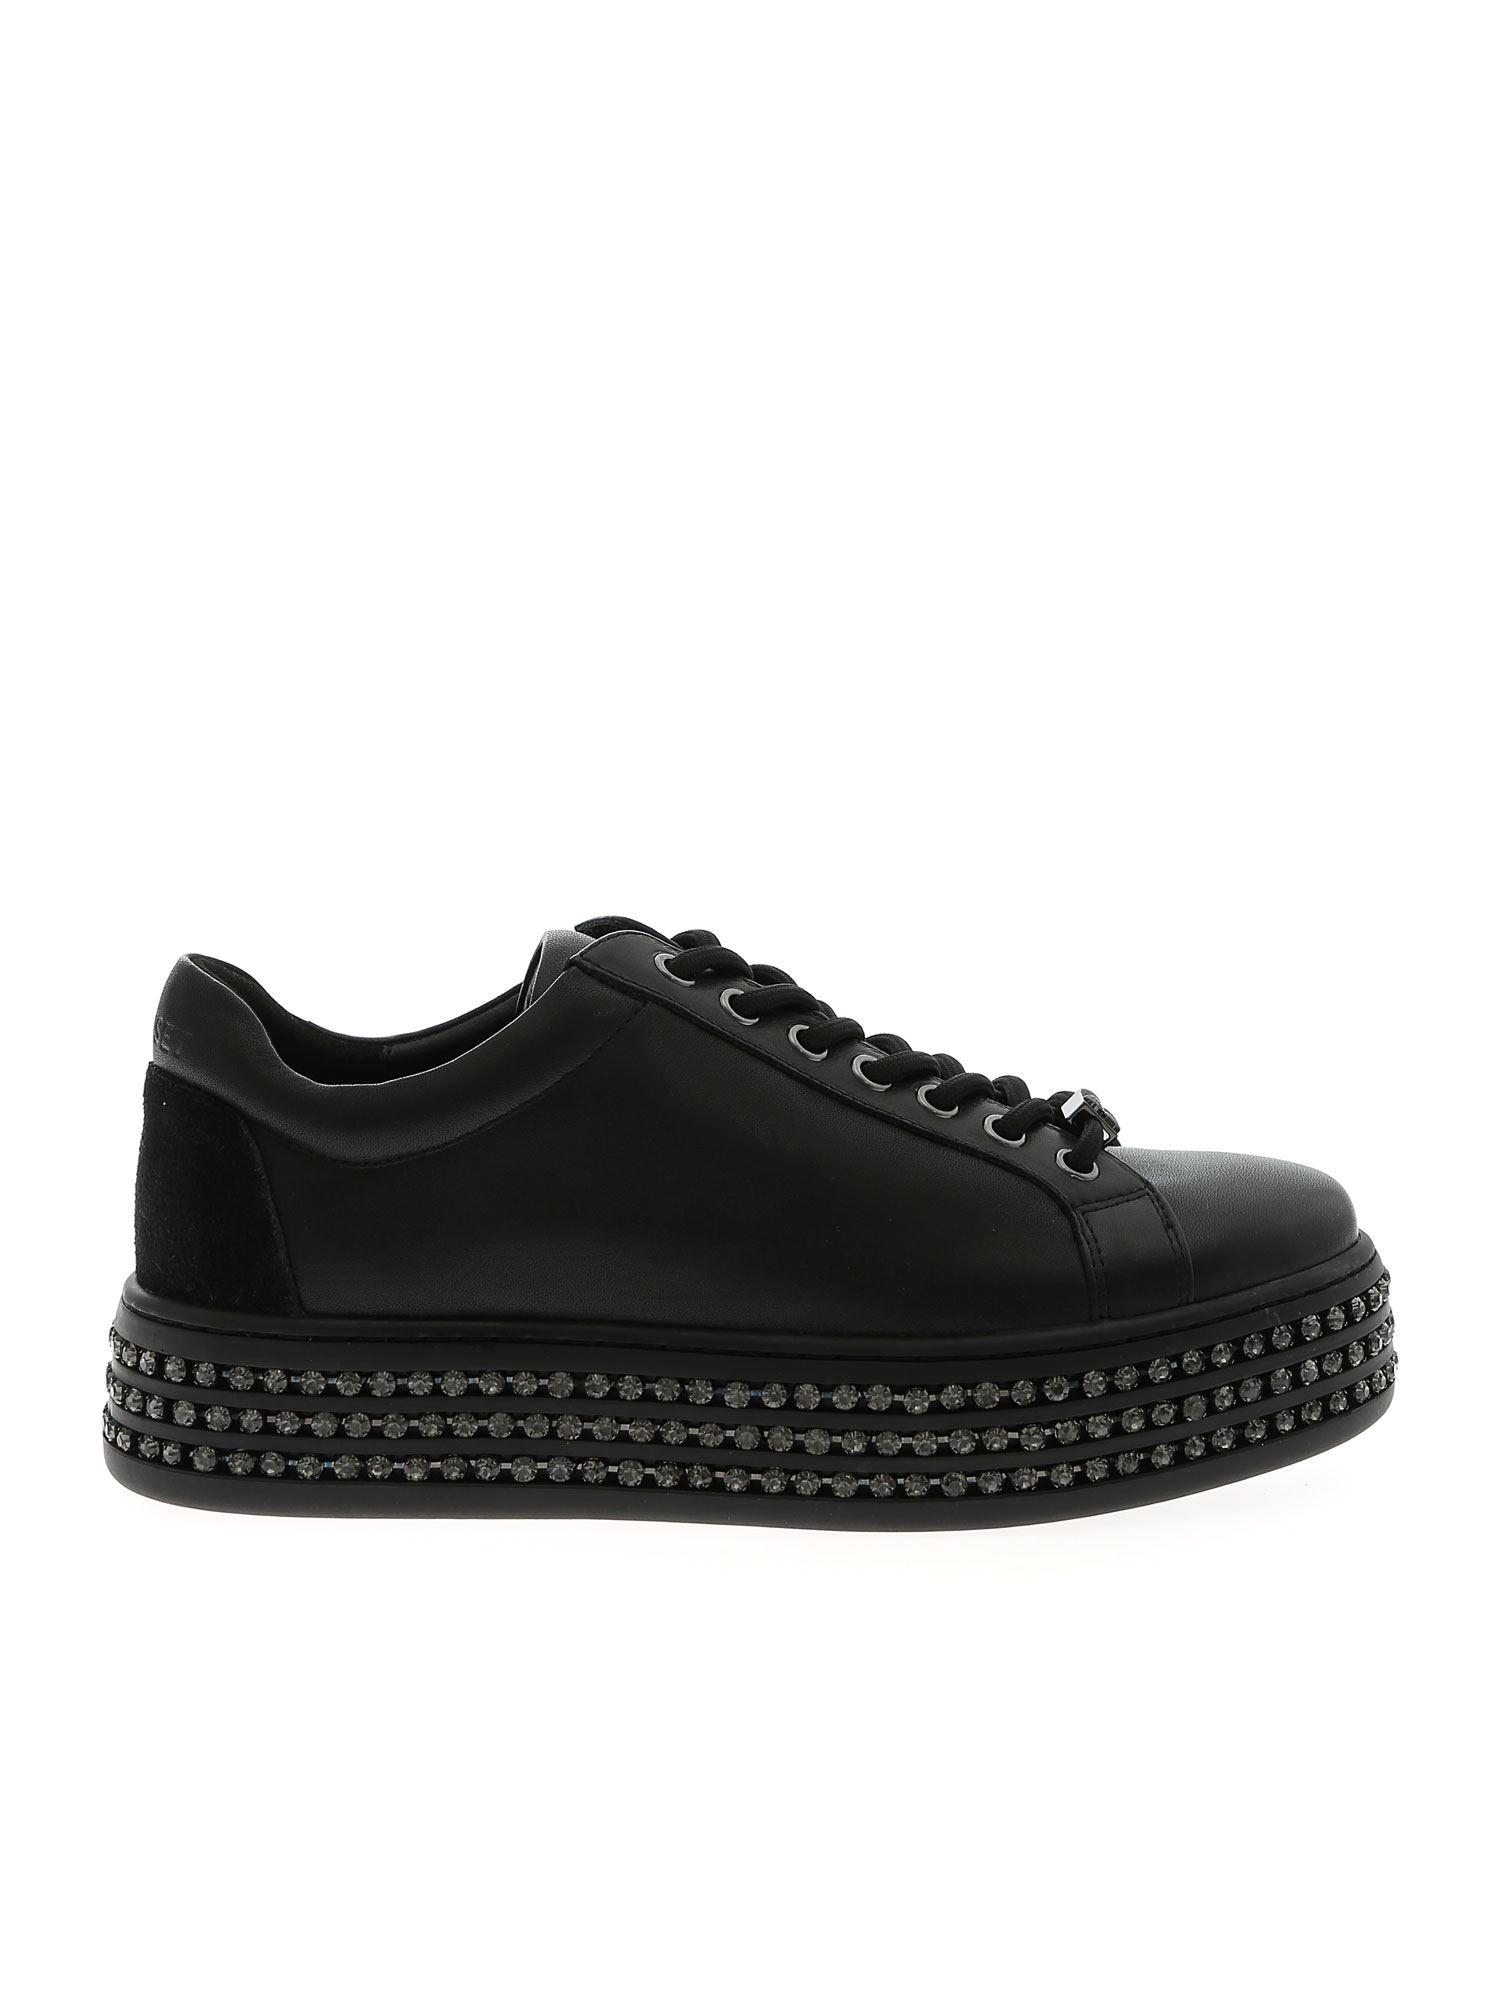 Twin Set Leather Black Sneakers With Rhinestones - Lyst